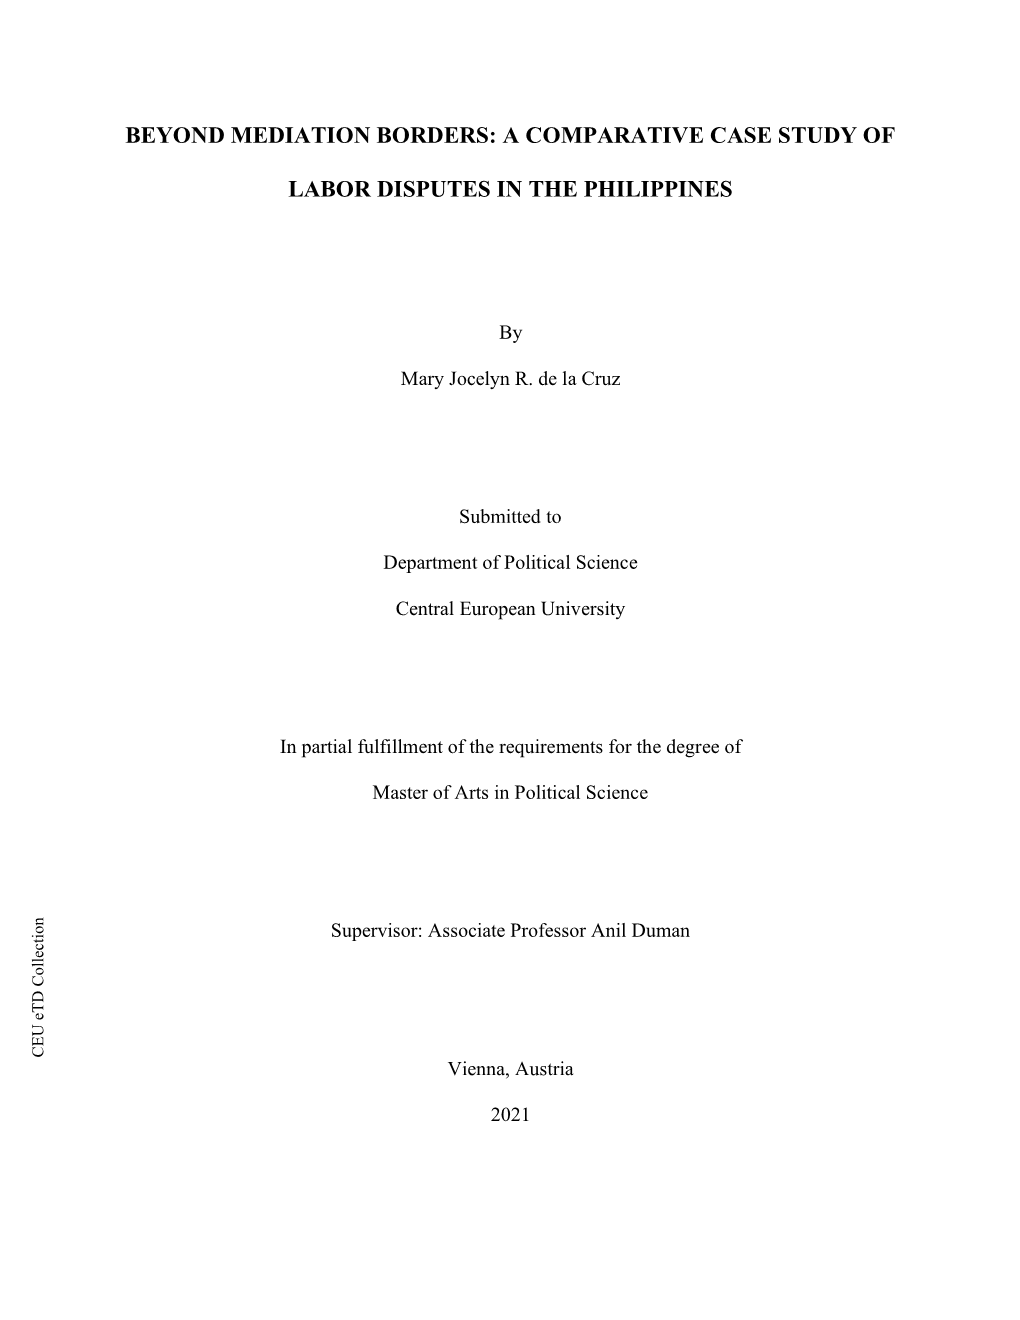 A Comparative Case Study of Labor Disputes in the Philippines